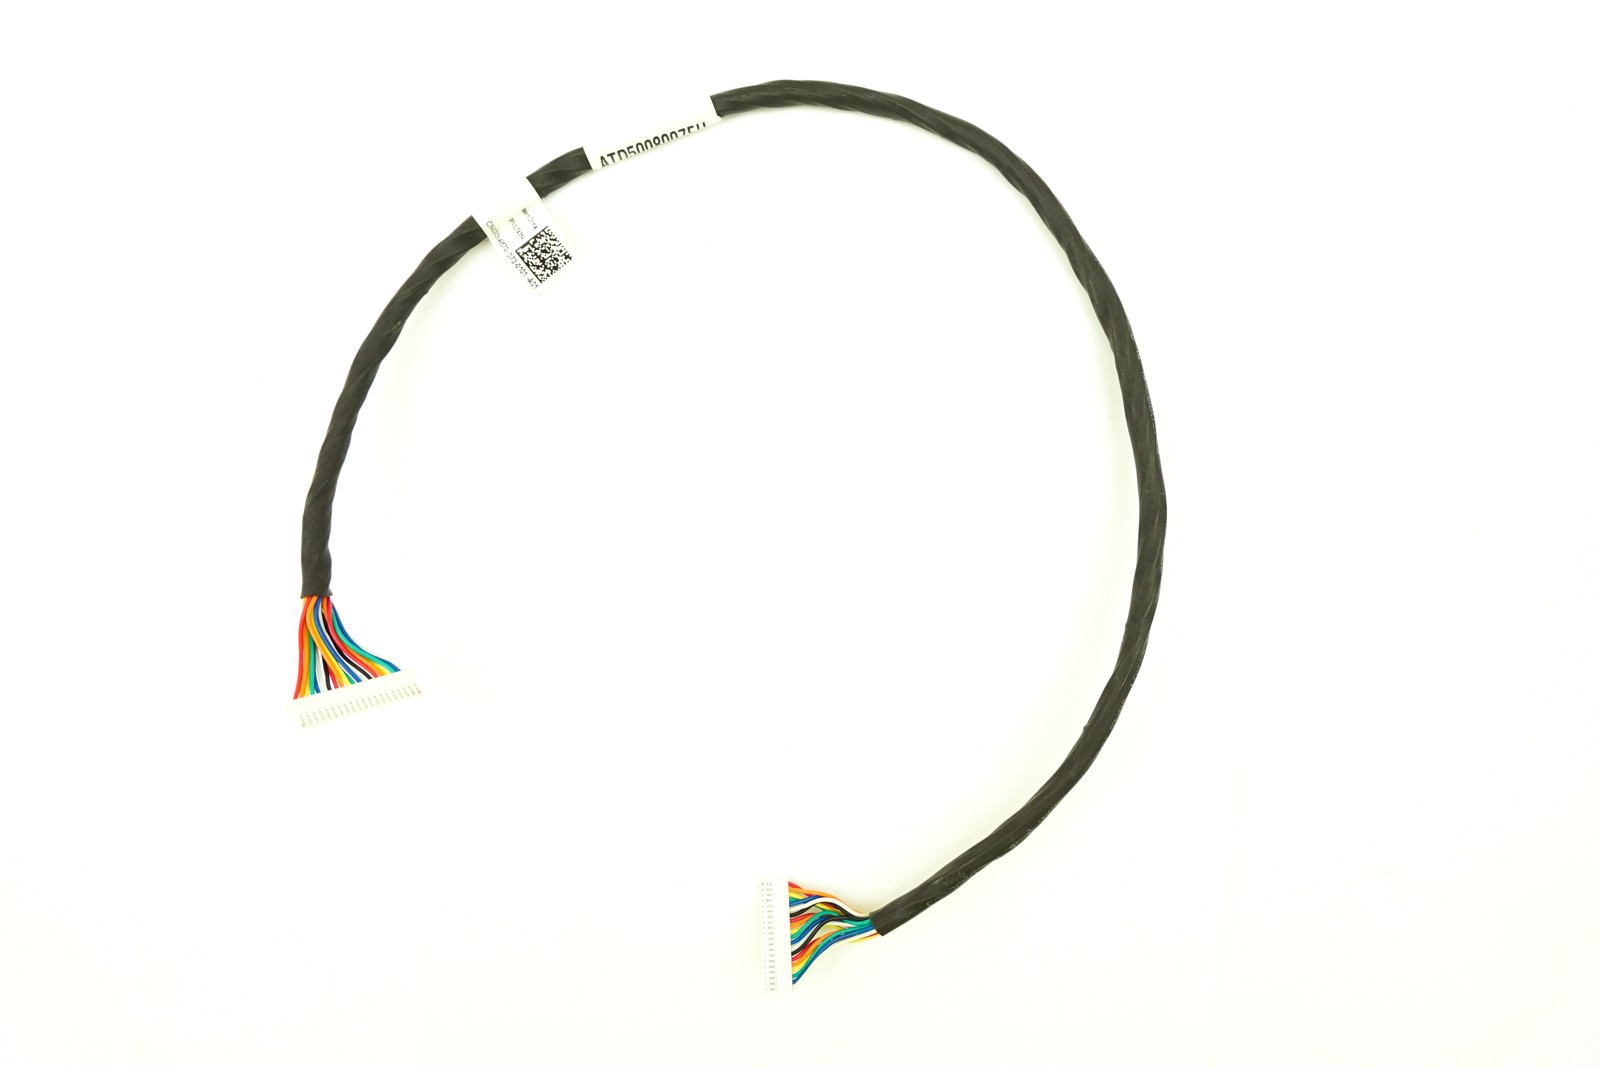 Dell LSI9260-8i-8 Battery Cable